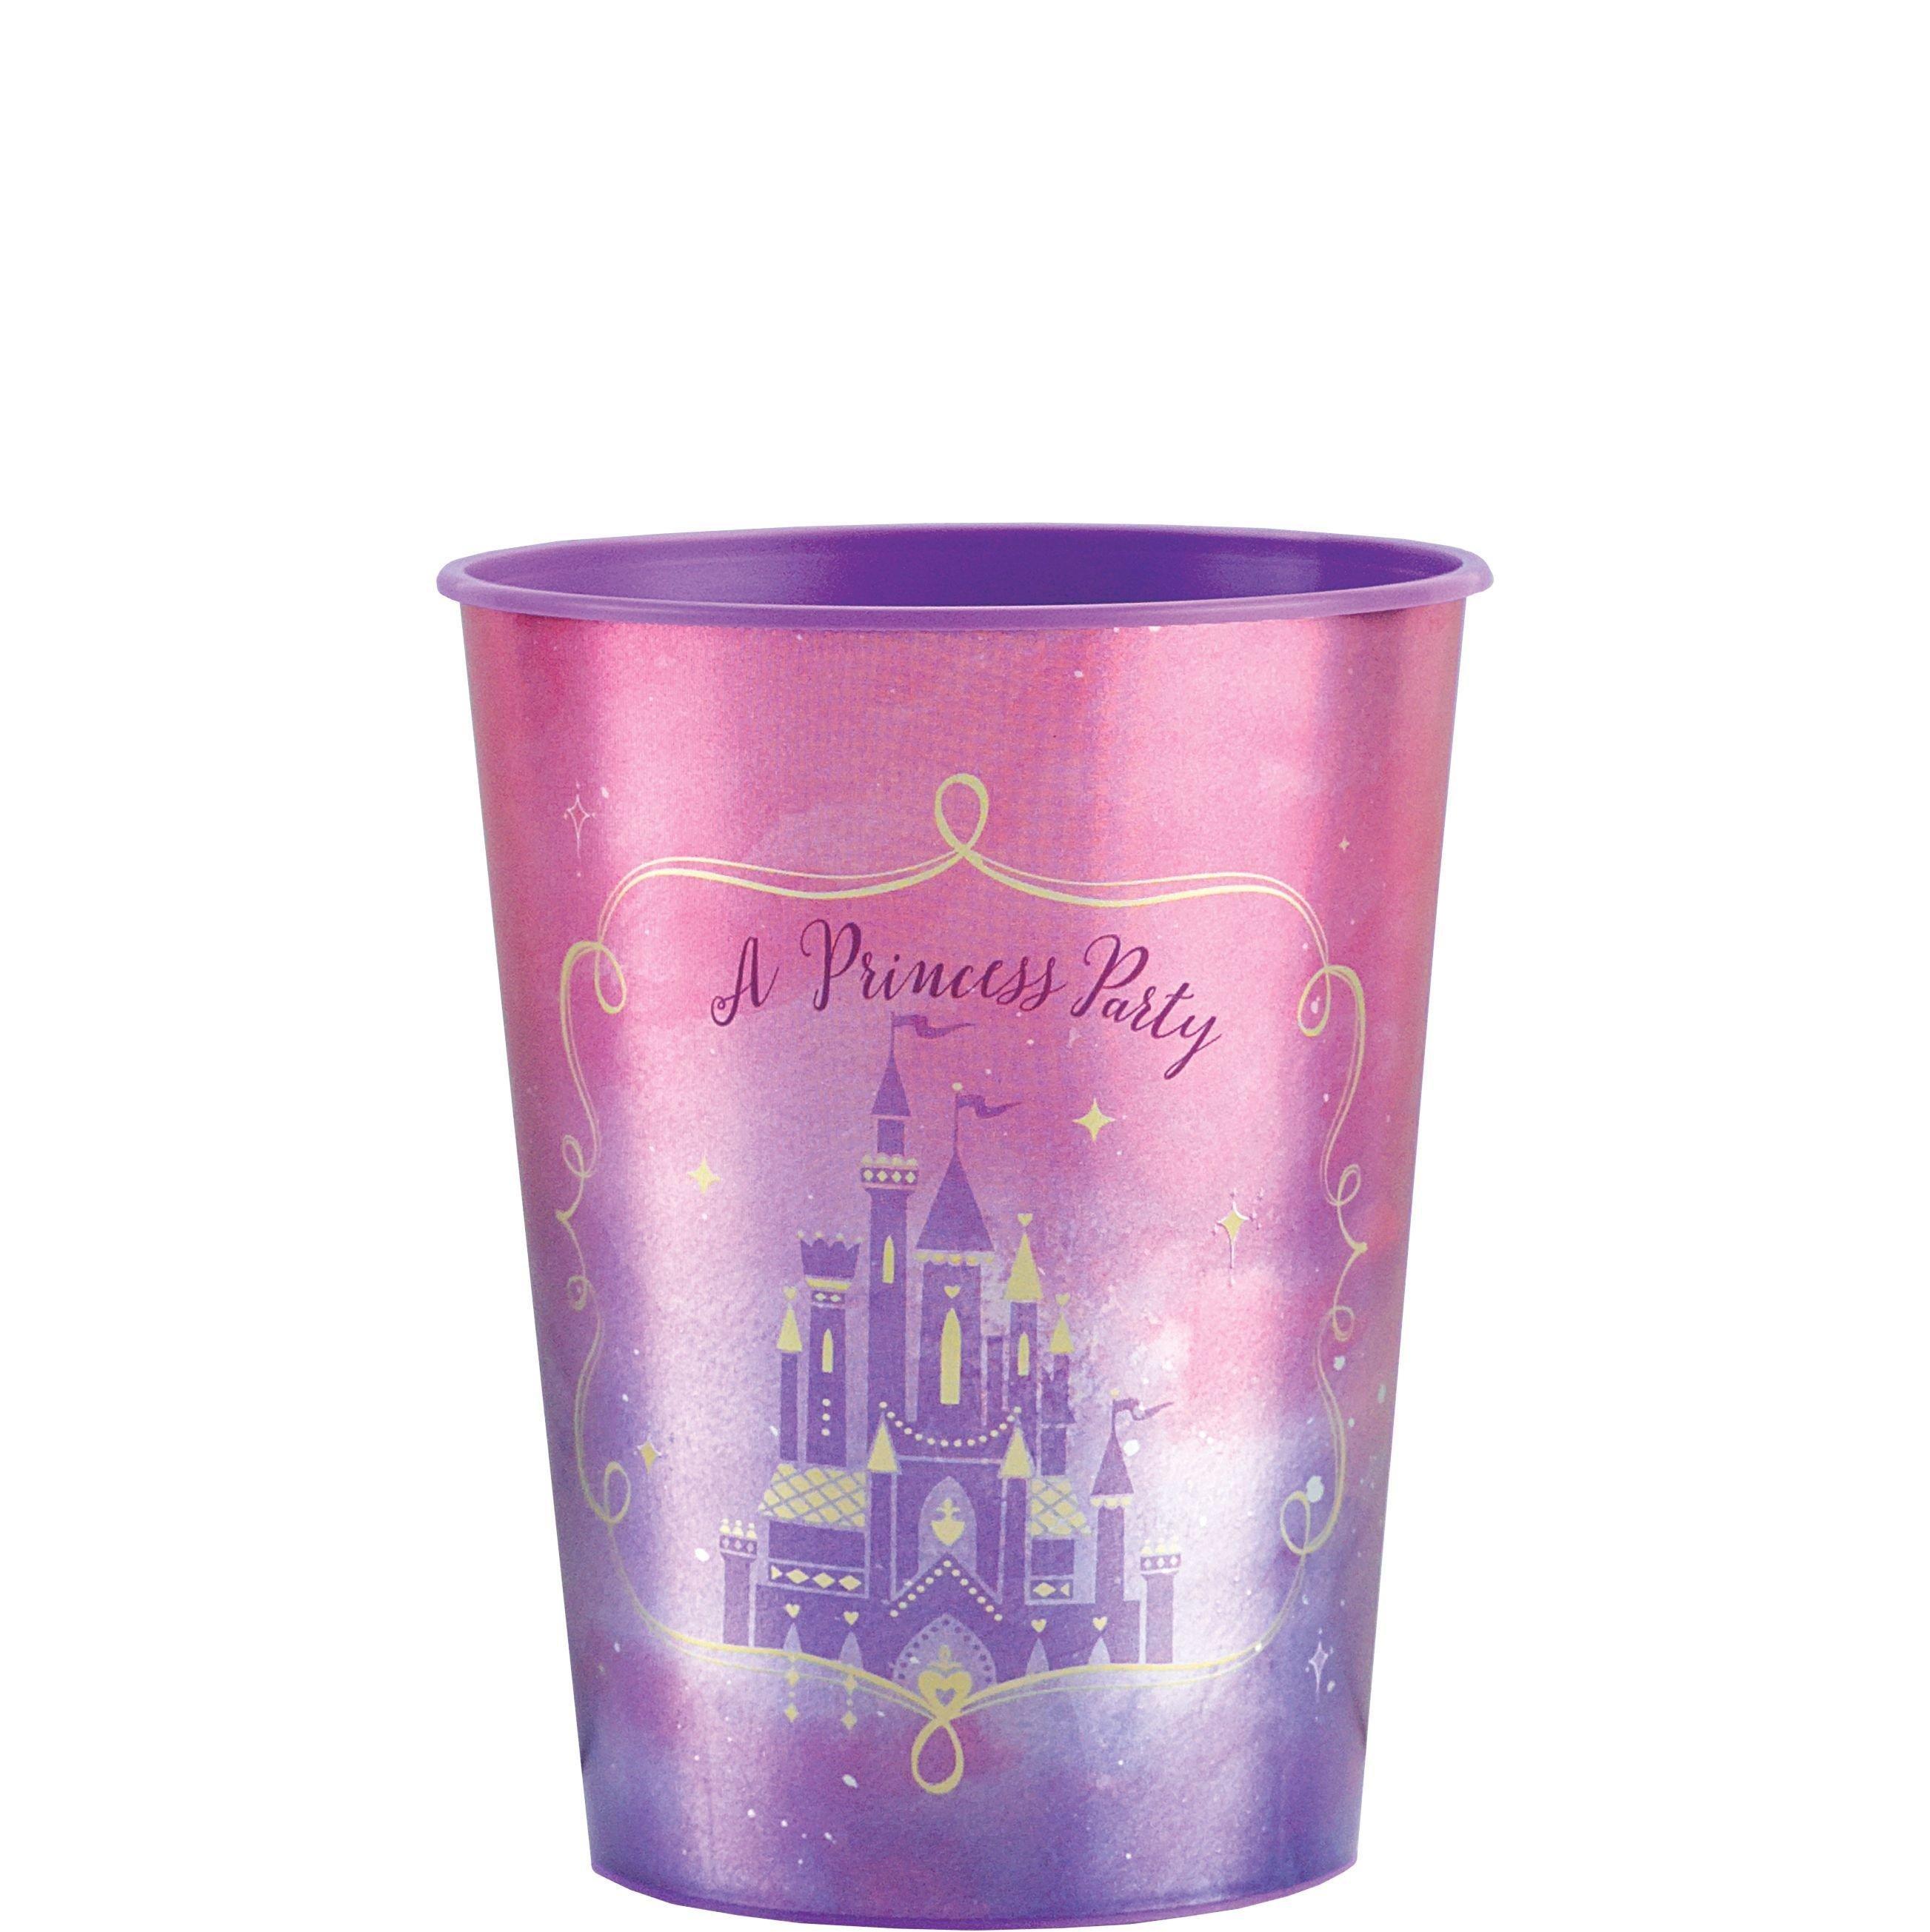 Disney Princess Party Favor Supplies Pack for 8 Guests - Kit Includes Favor Cups, Favor Pack & Hair Scrunchies